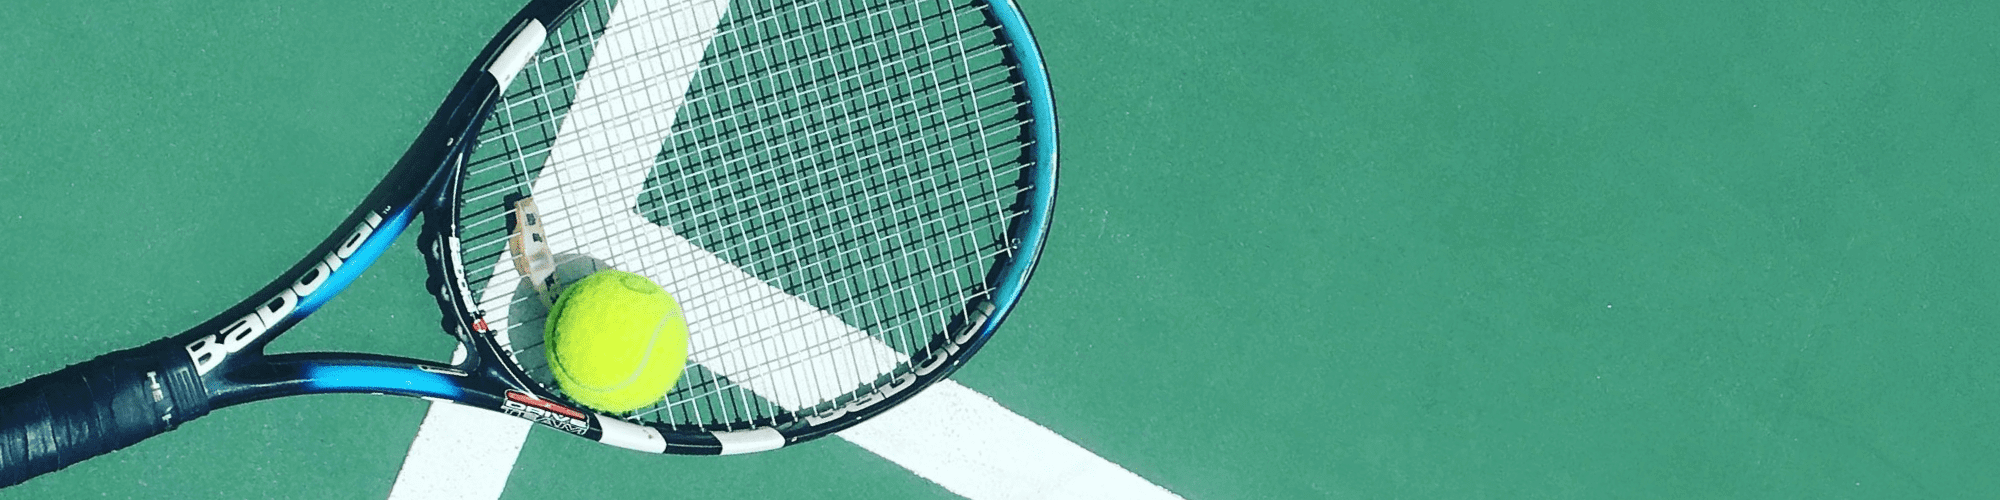 tennis racket with tennis ball on the ground of a tennis court